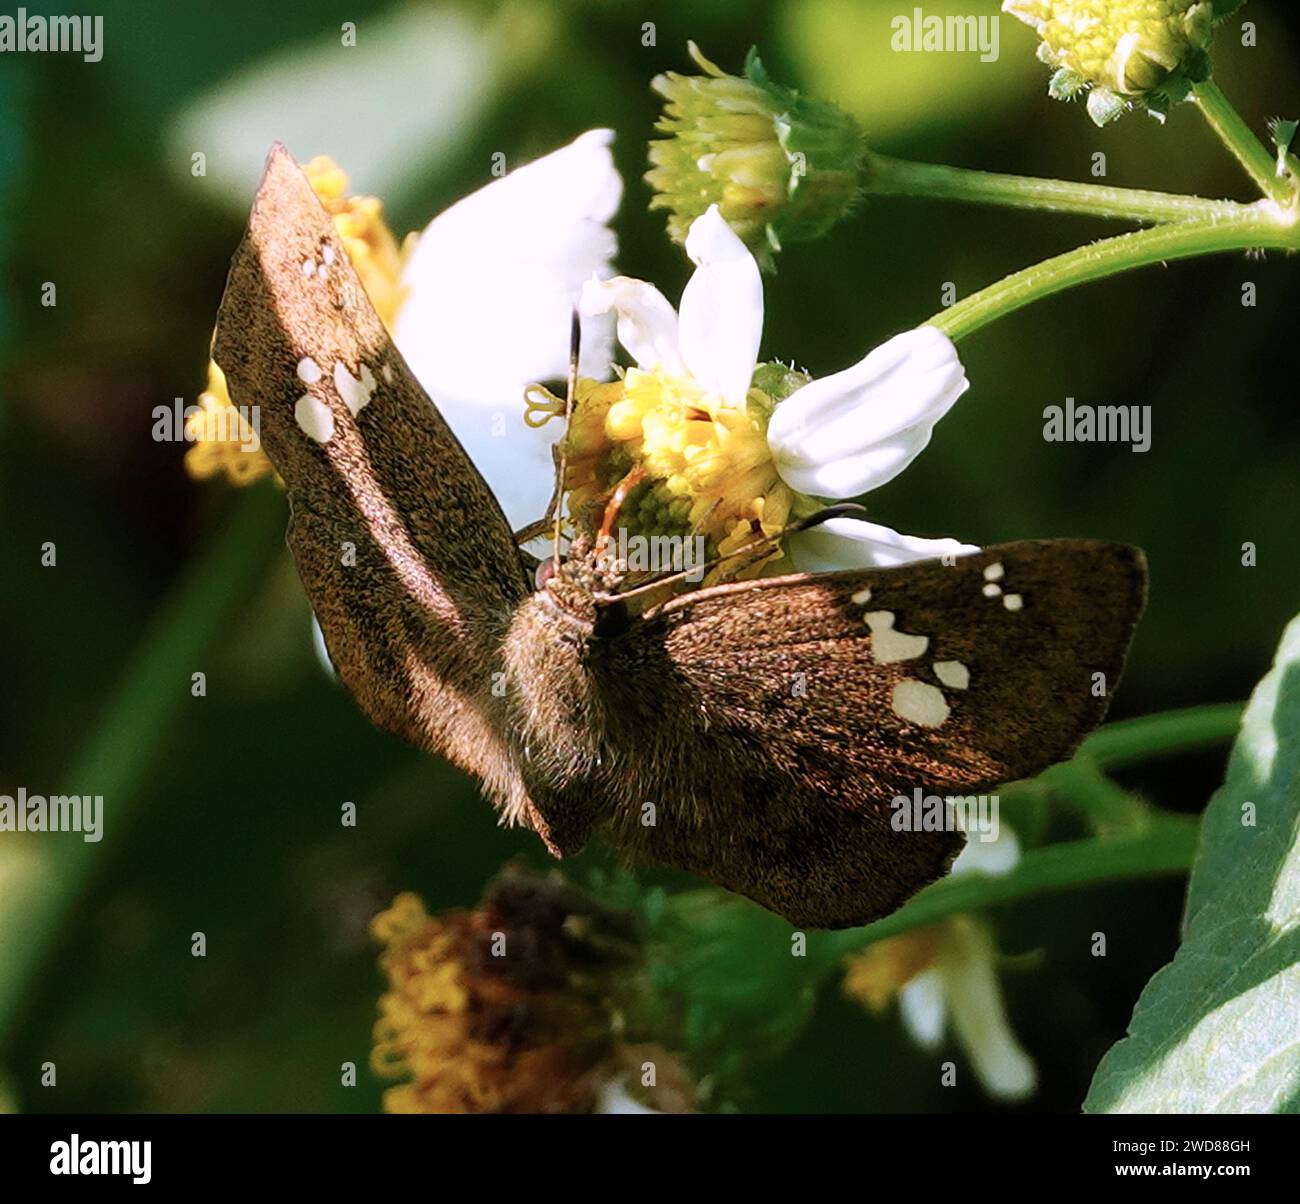 A common small flat butterfly on a white flower Stock Photo